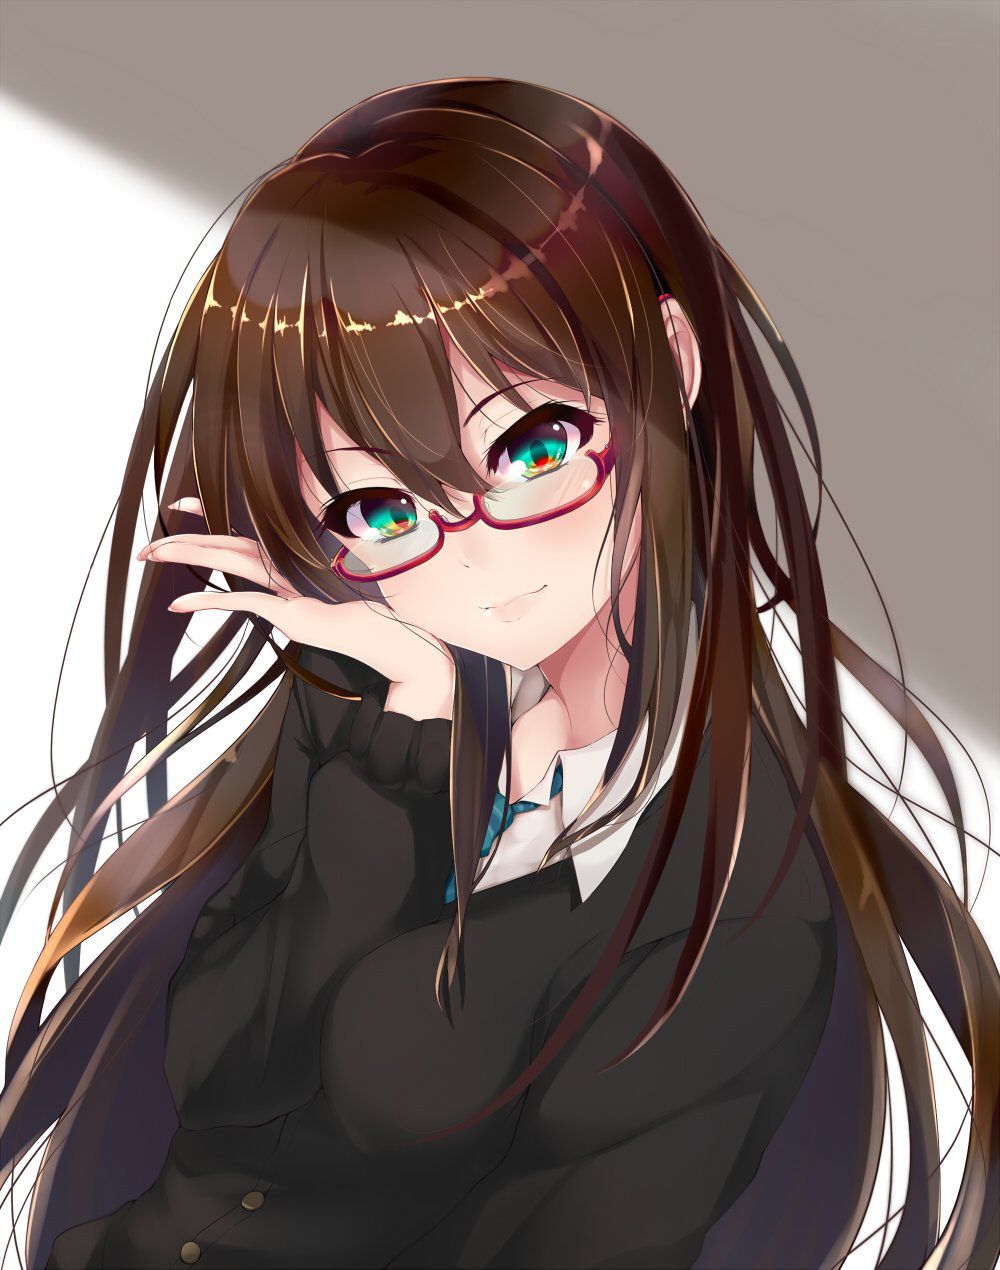 [2nd] Second image of the cute glasses girl [Part 2] [erotic glasses] 24